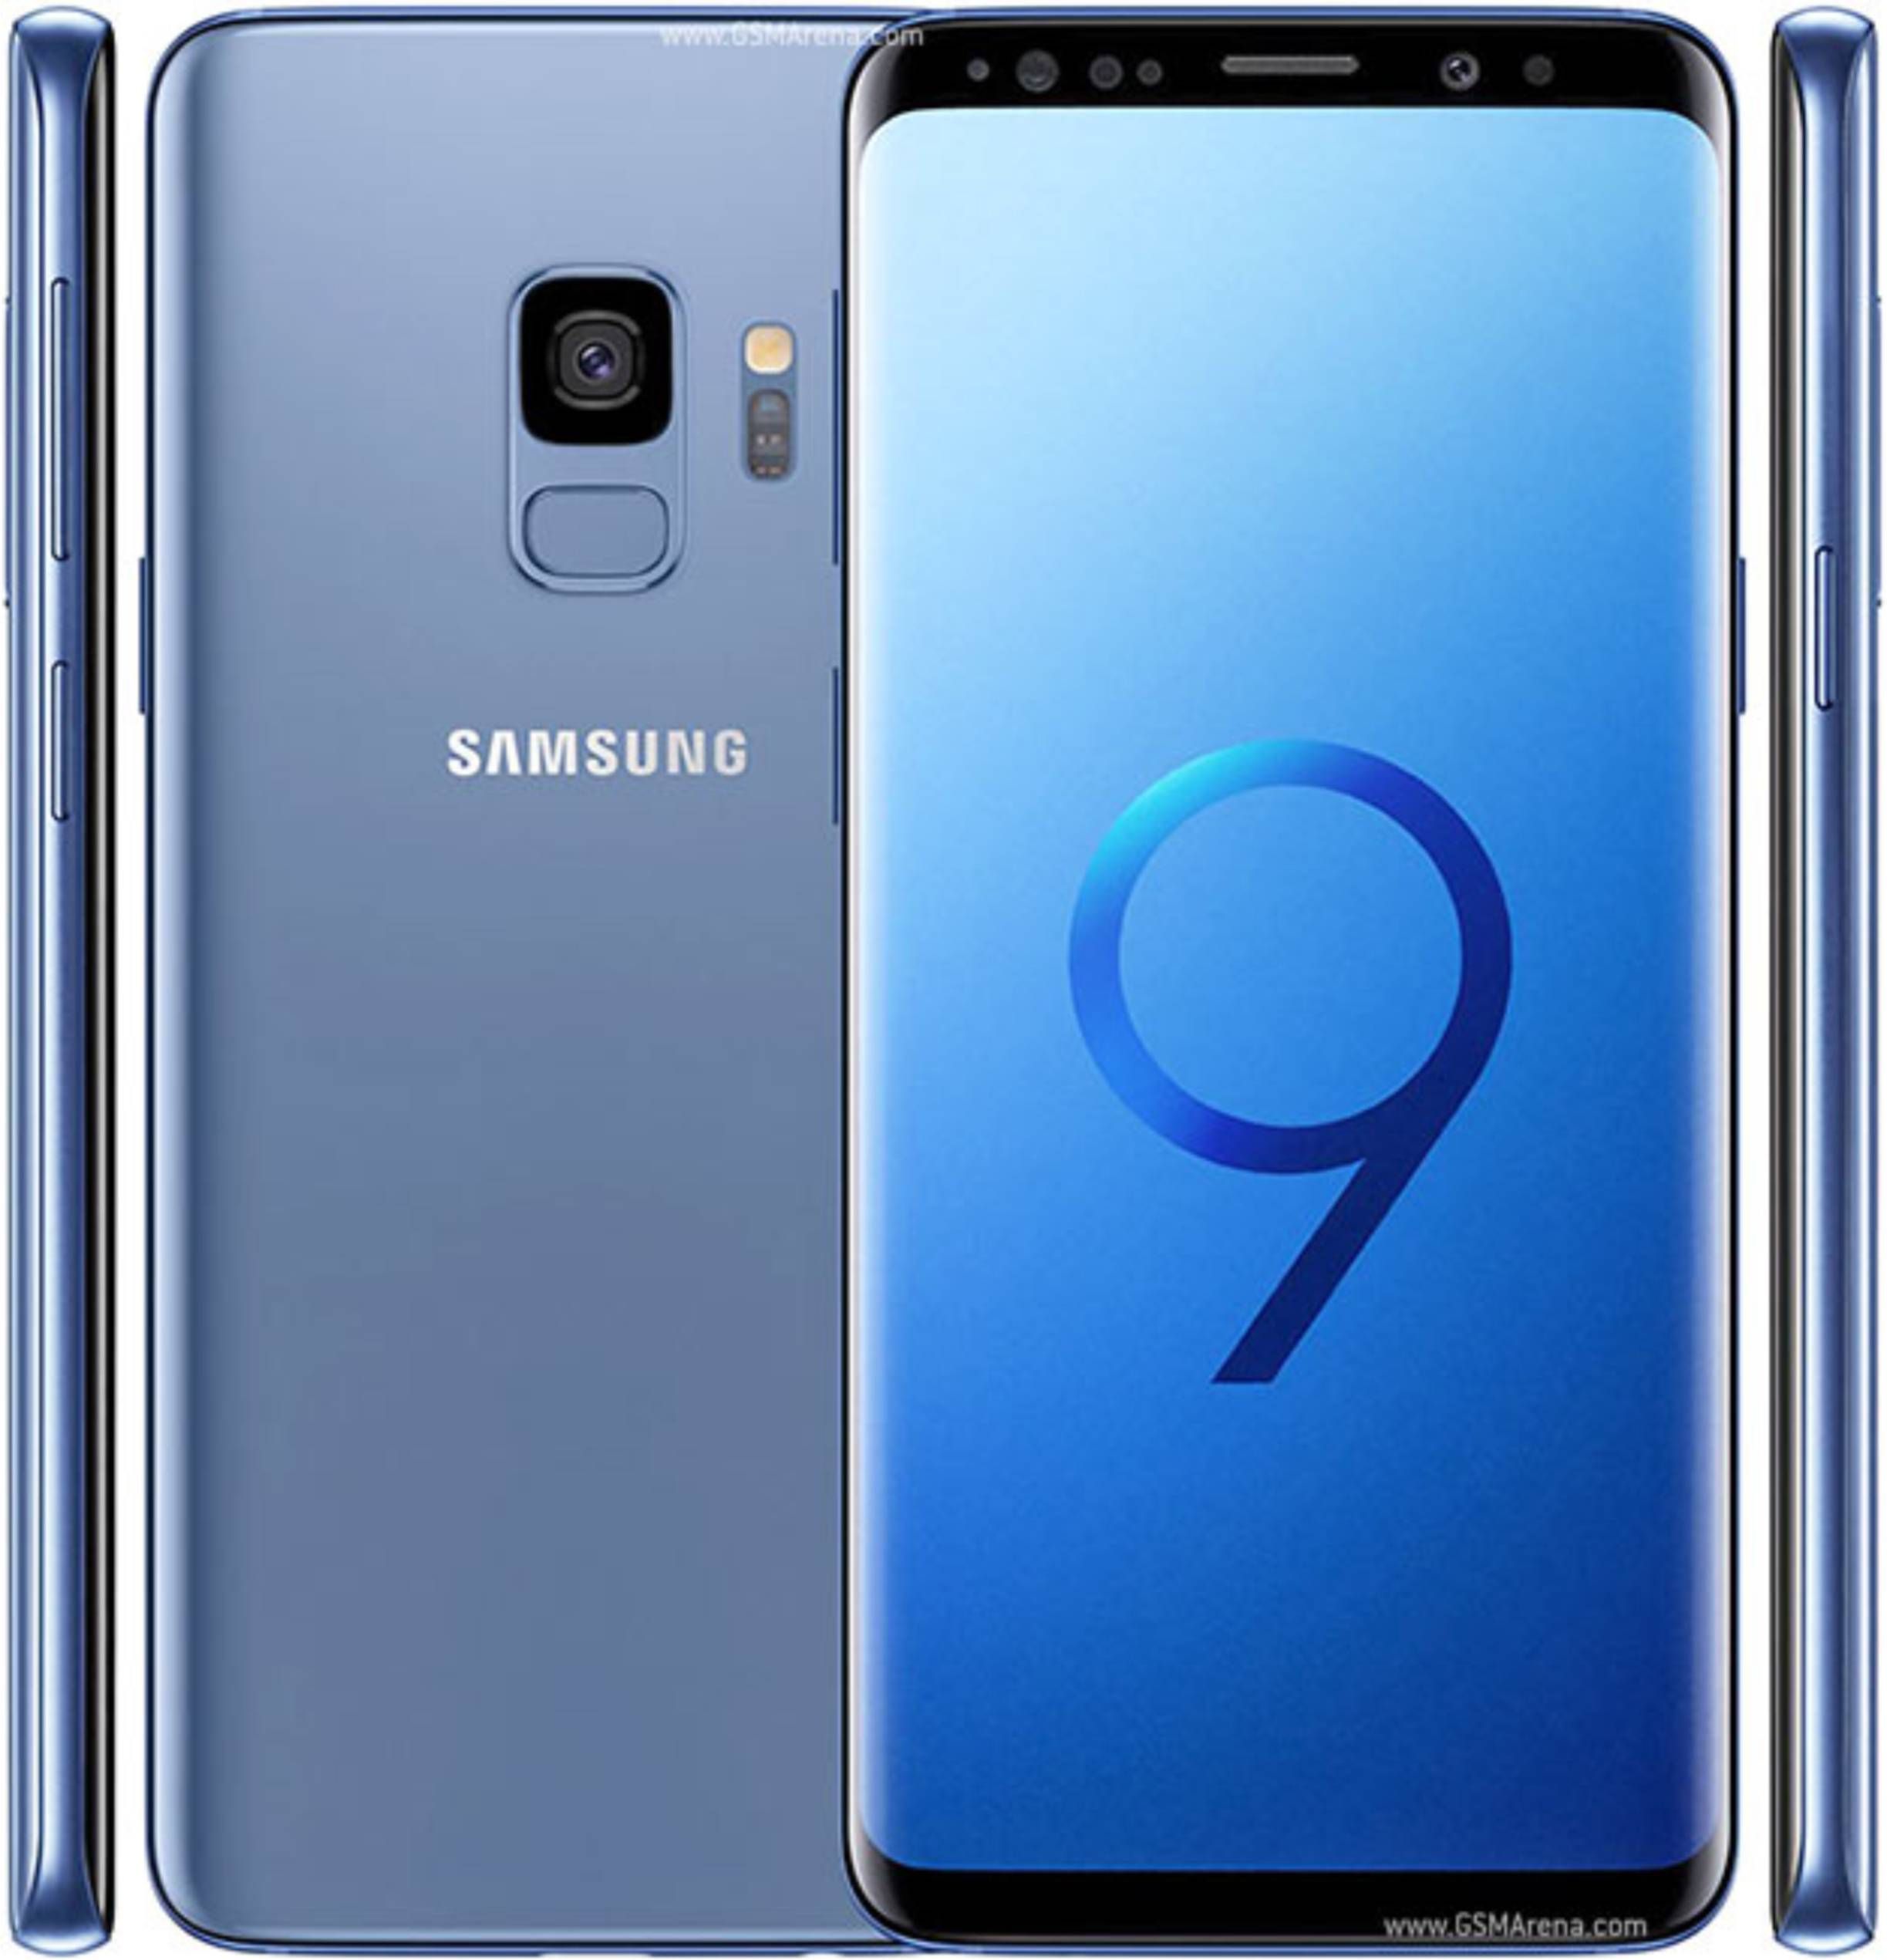 What is Samsung Galaxy S9 Screen Replacement Cost in Kenya?